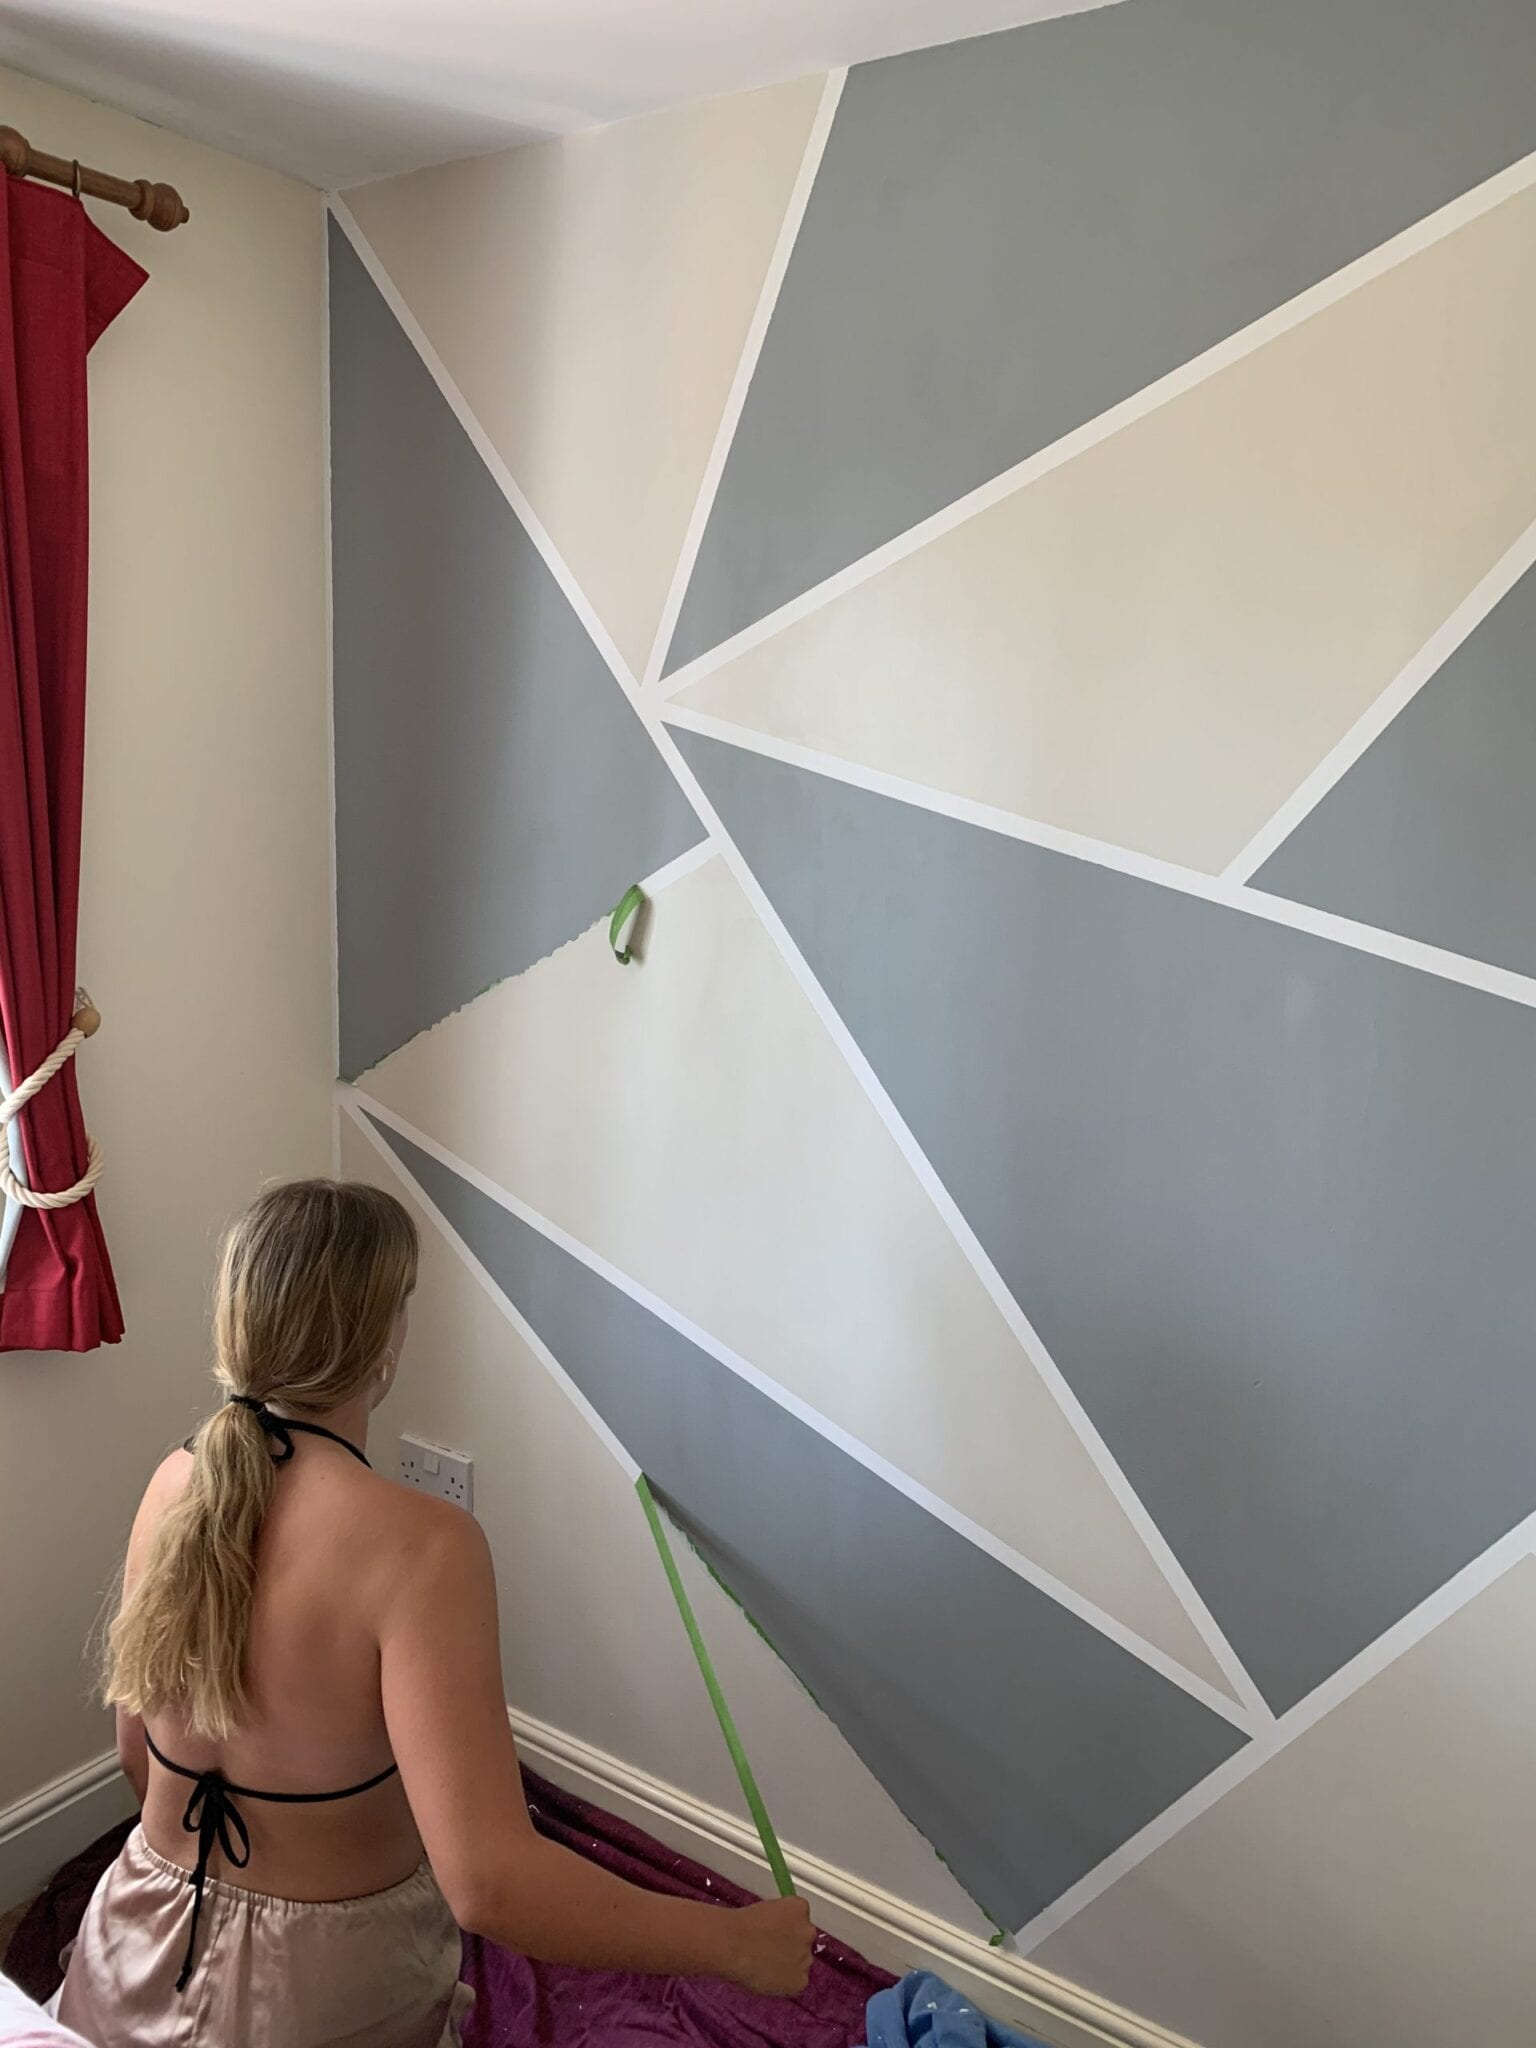 How To Paint Gorgeous Geometric Wall Designs Easily | Emma and 3